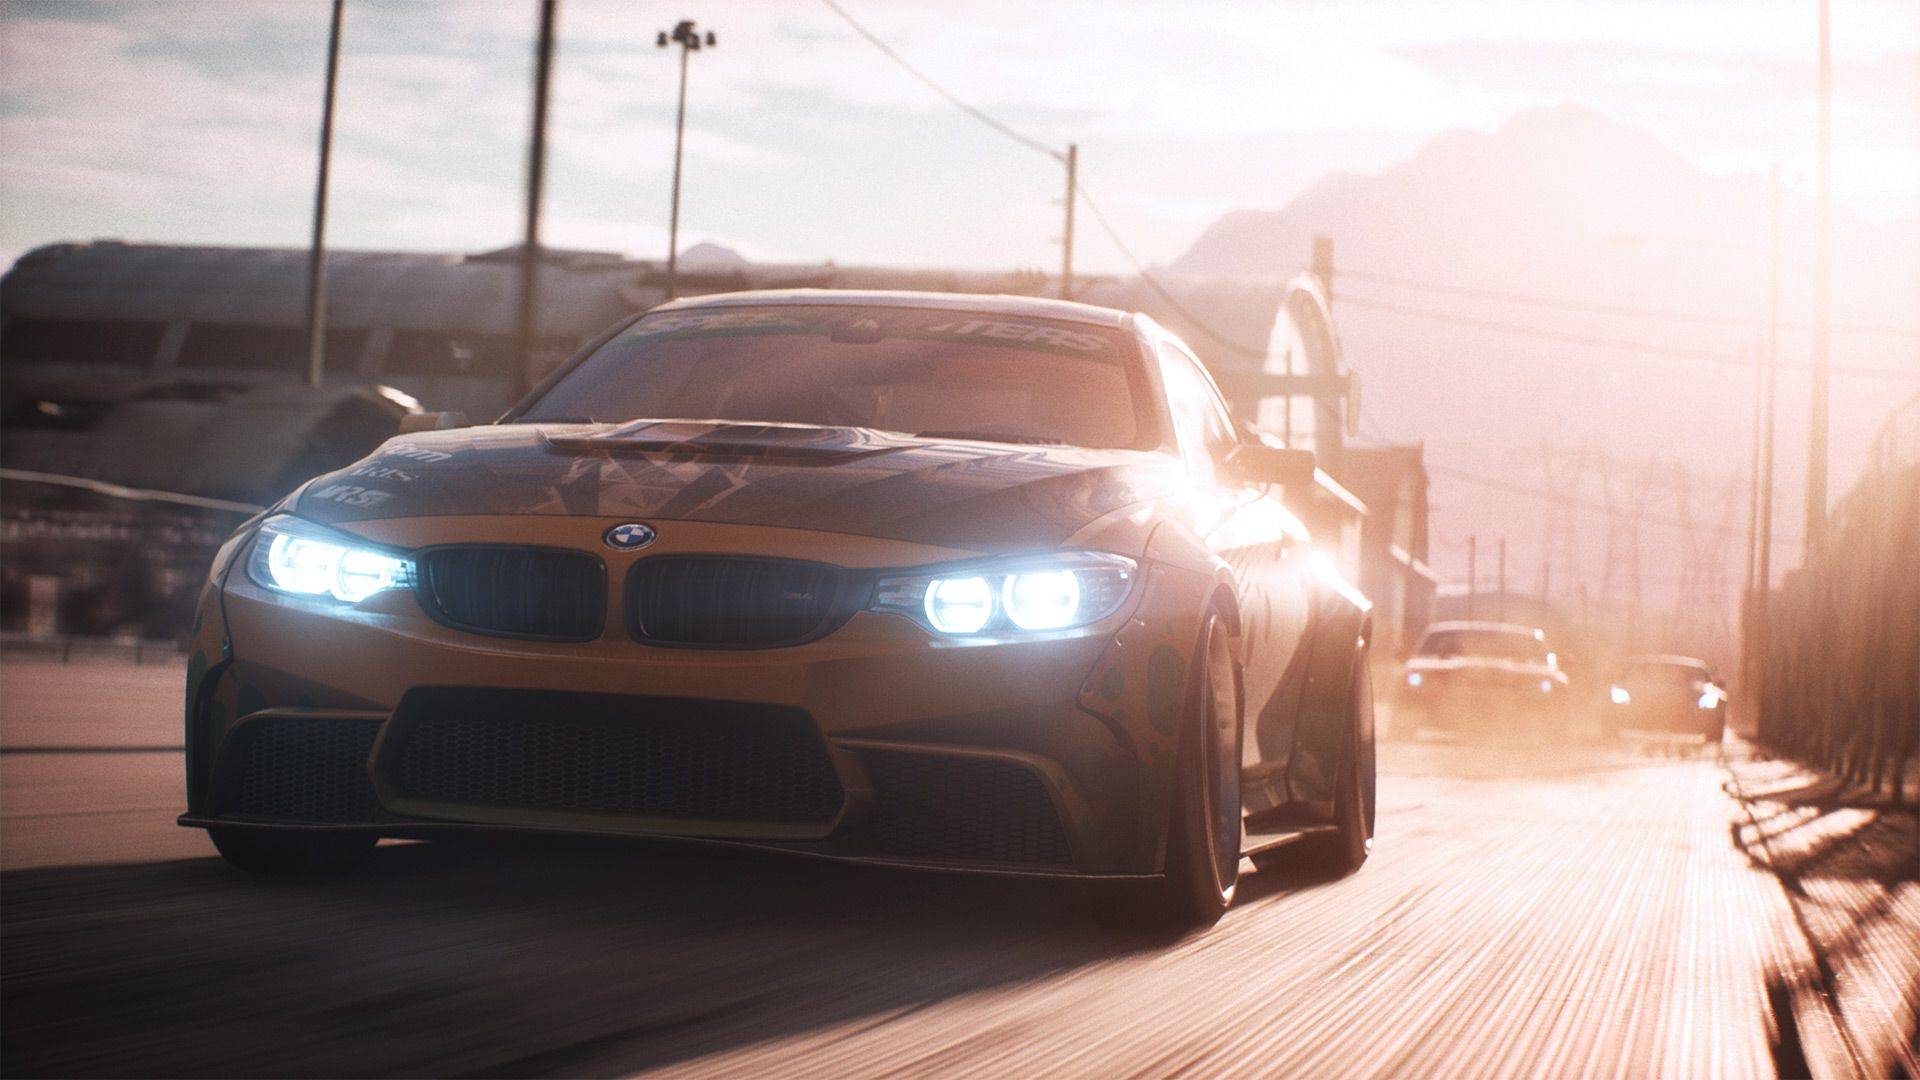 need for speed payback free download for pc windows 10